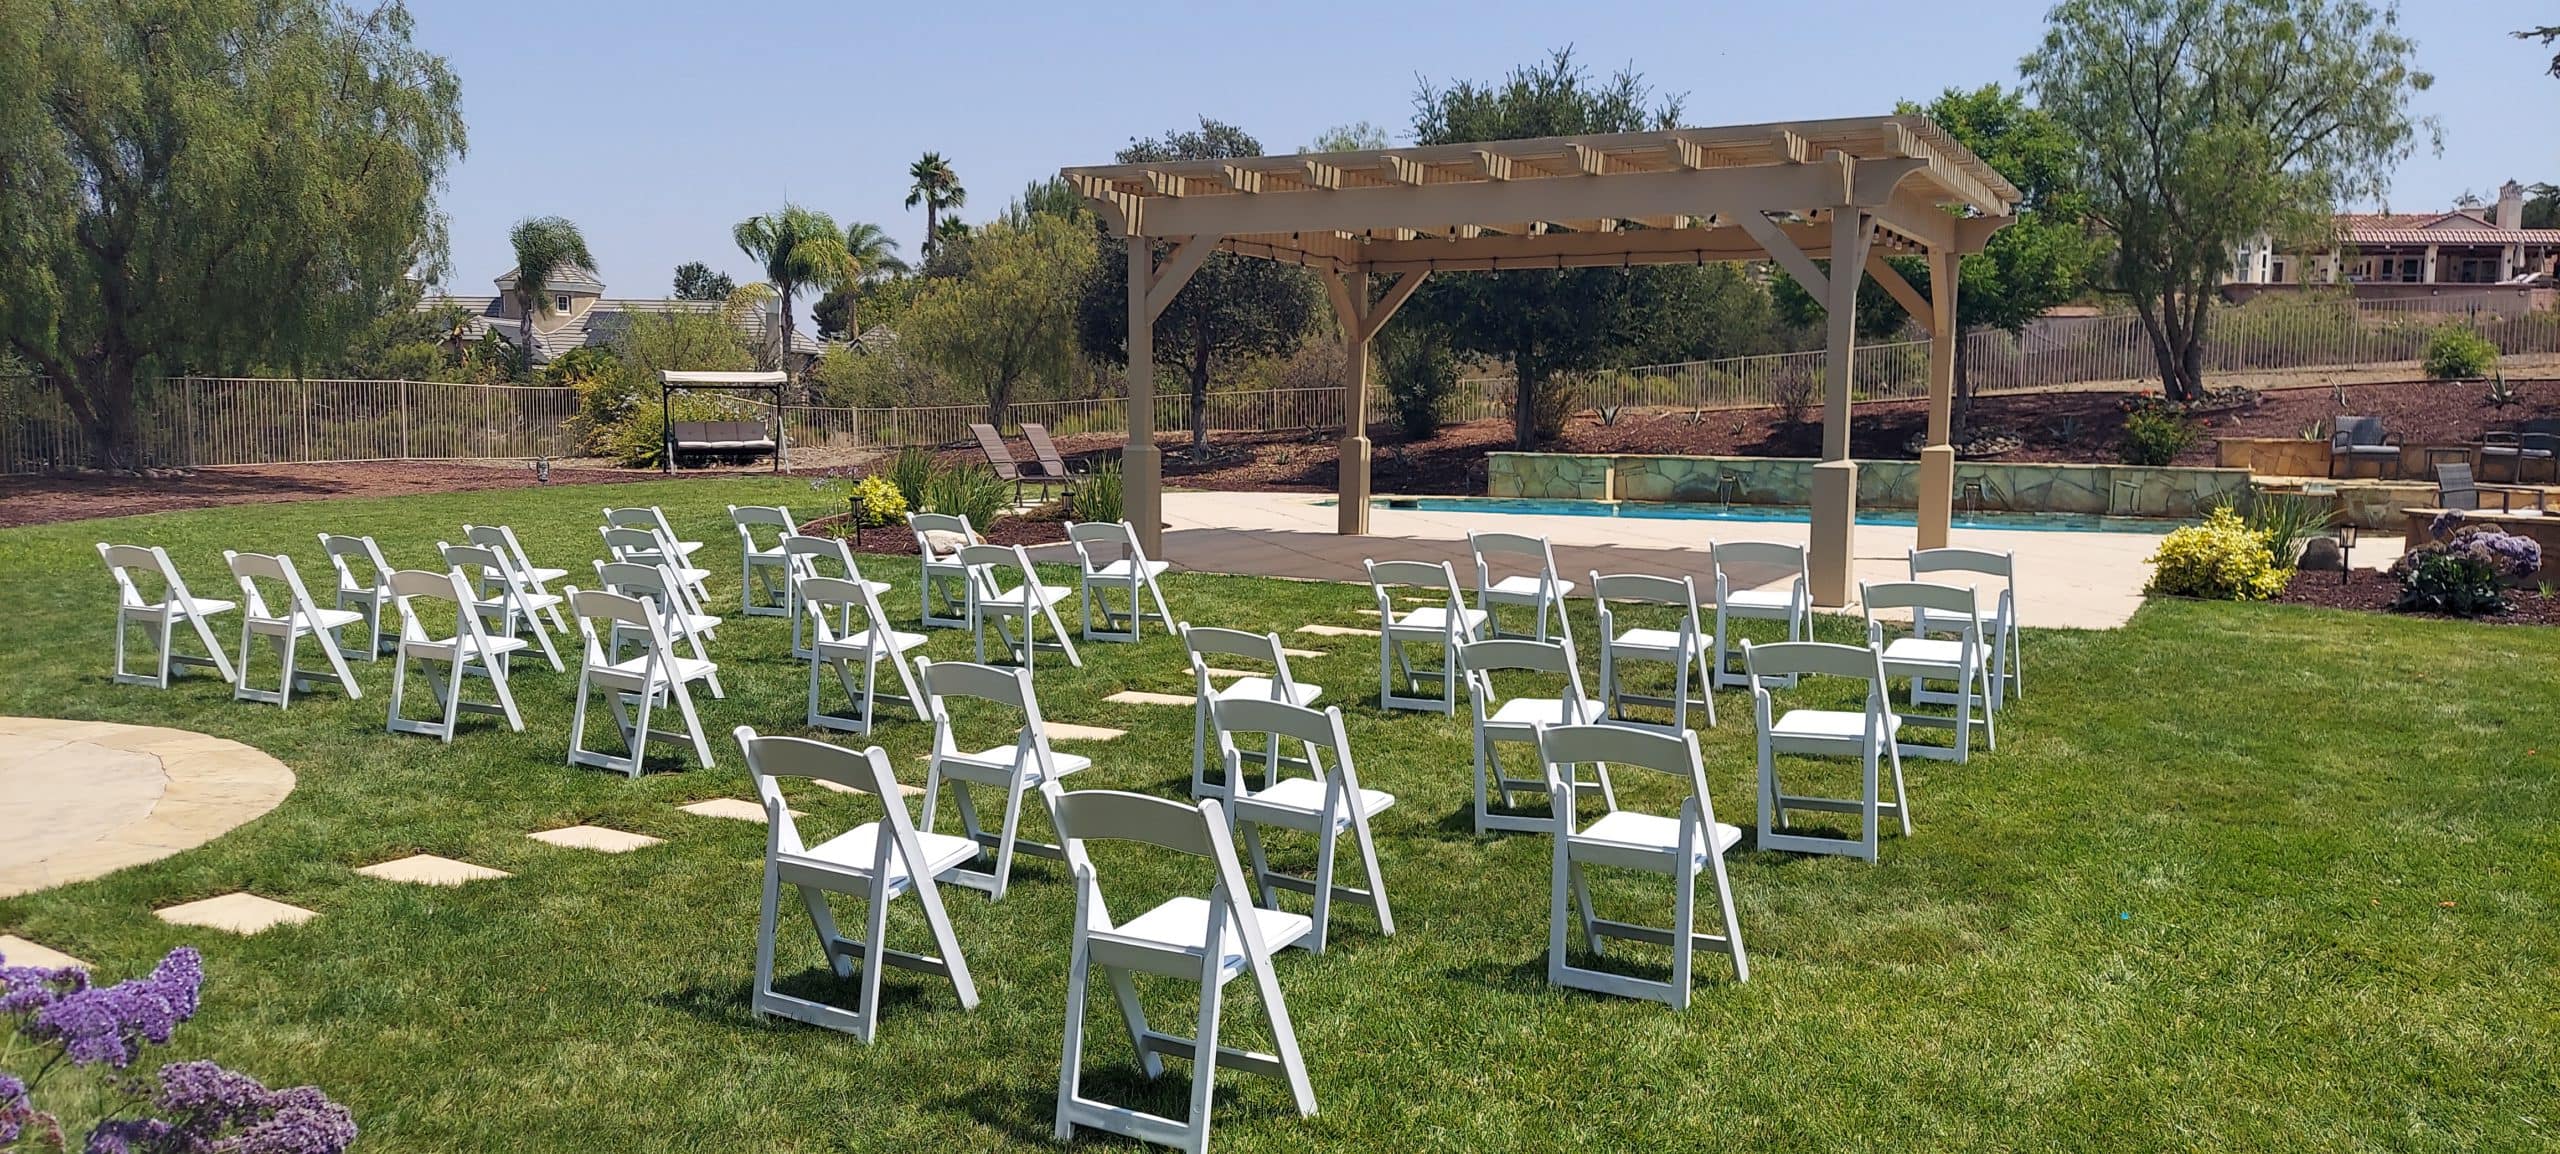 The Resort in Thousand Oaks - Event setup options